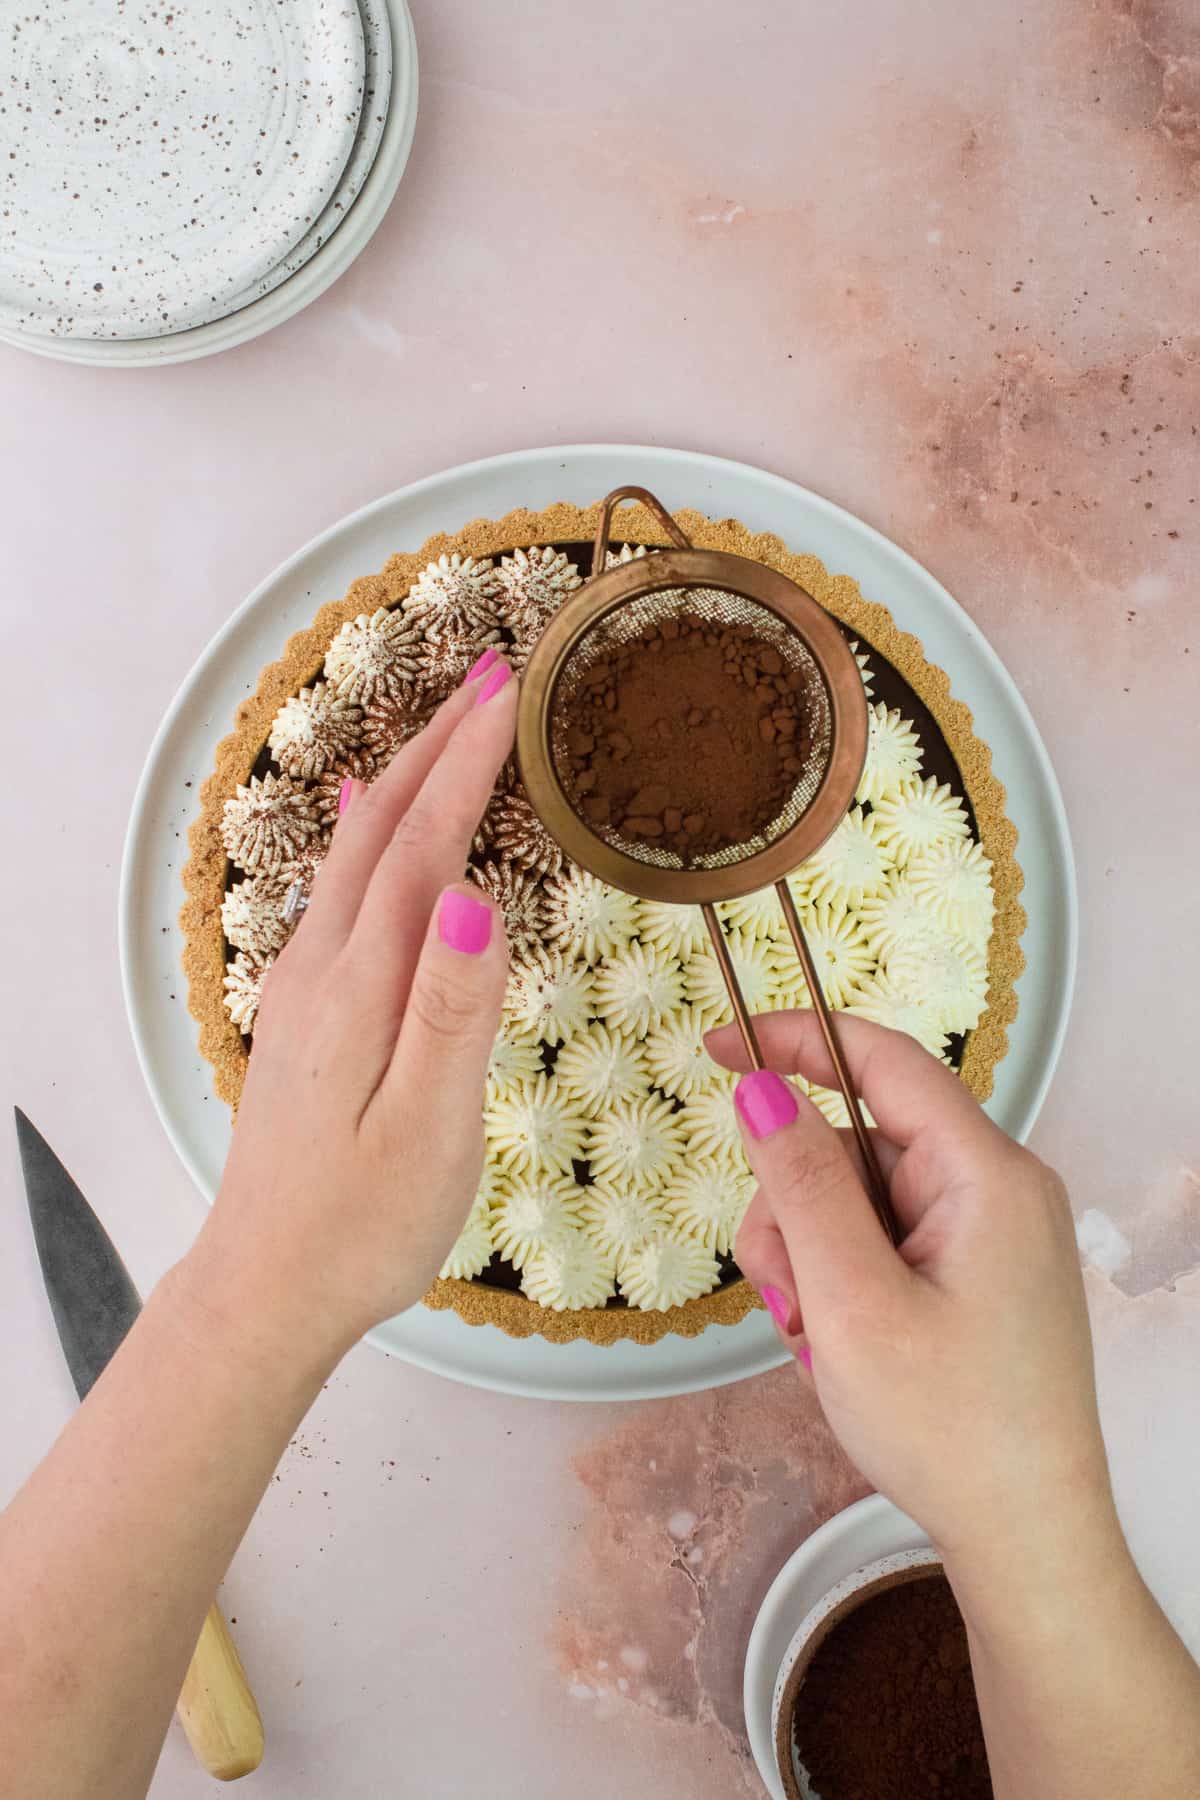 Hands are holding a small strainer with cocoa powder and dusting cocoa powder on top of the tart